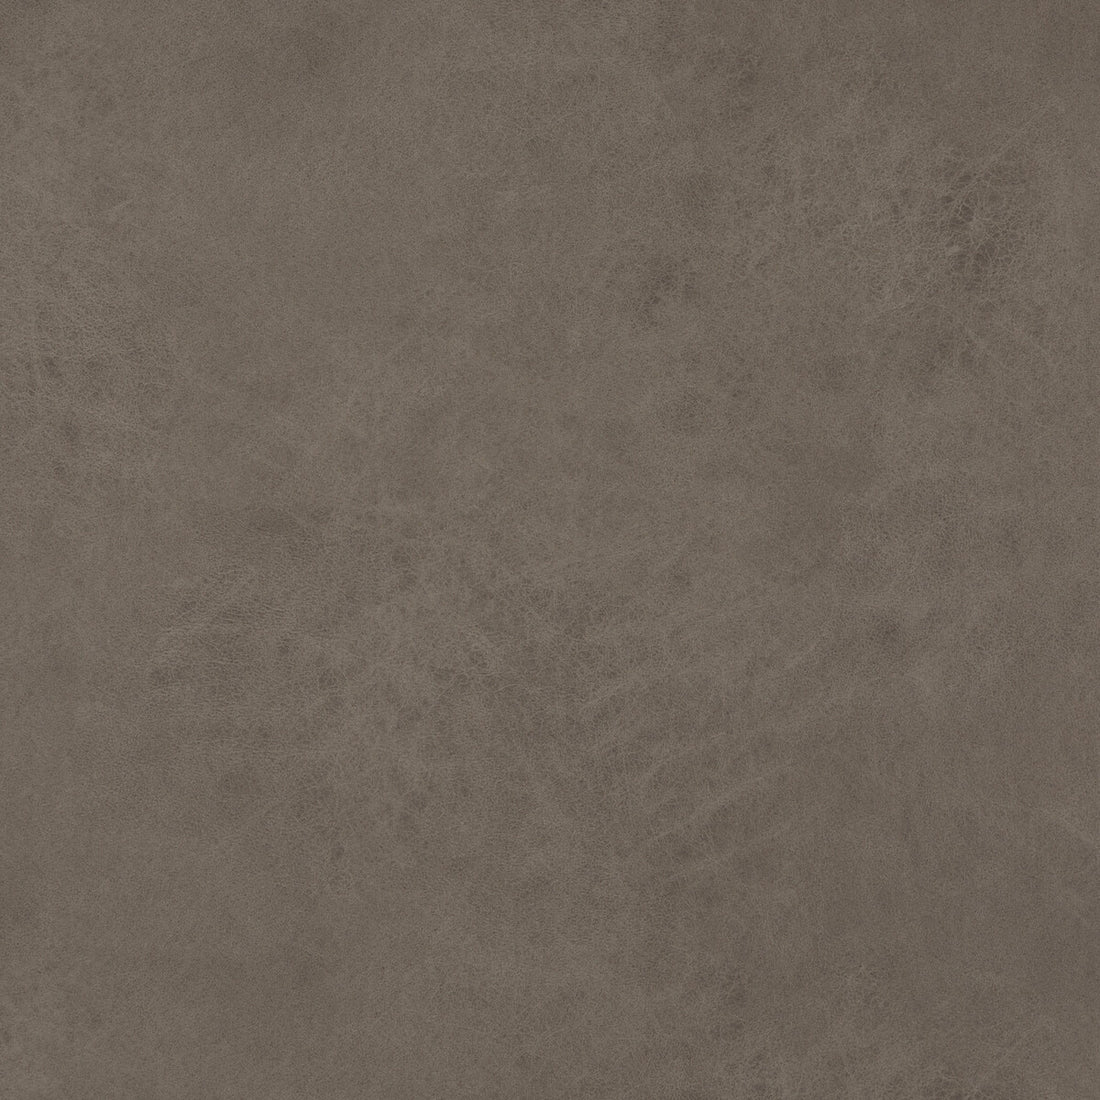 Lexham fabric in woodsmoke color - pattern PF50412.935.0 - by Baker Lifestyle in the Notebooks collection